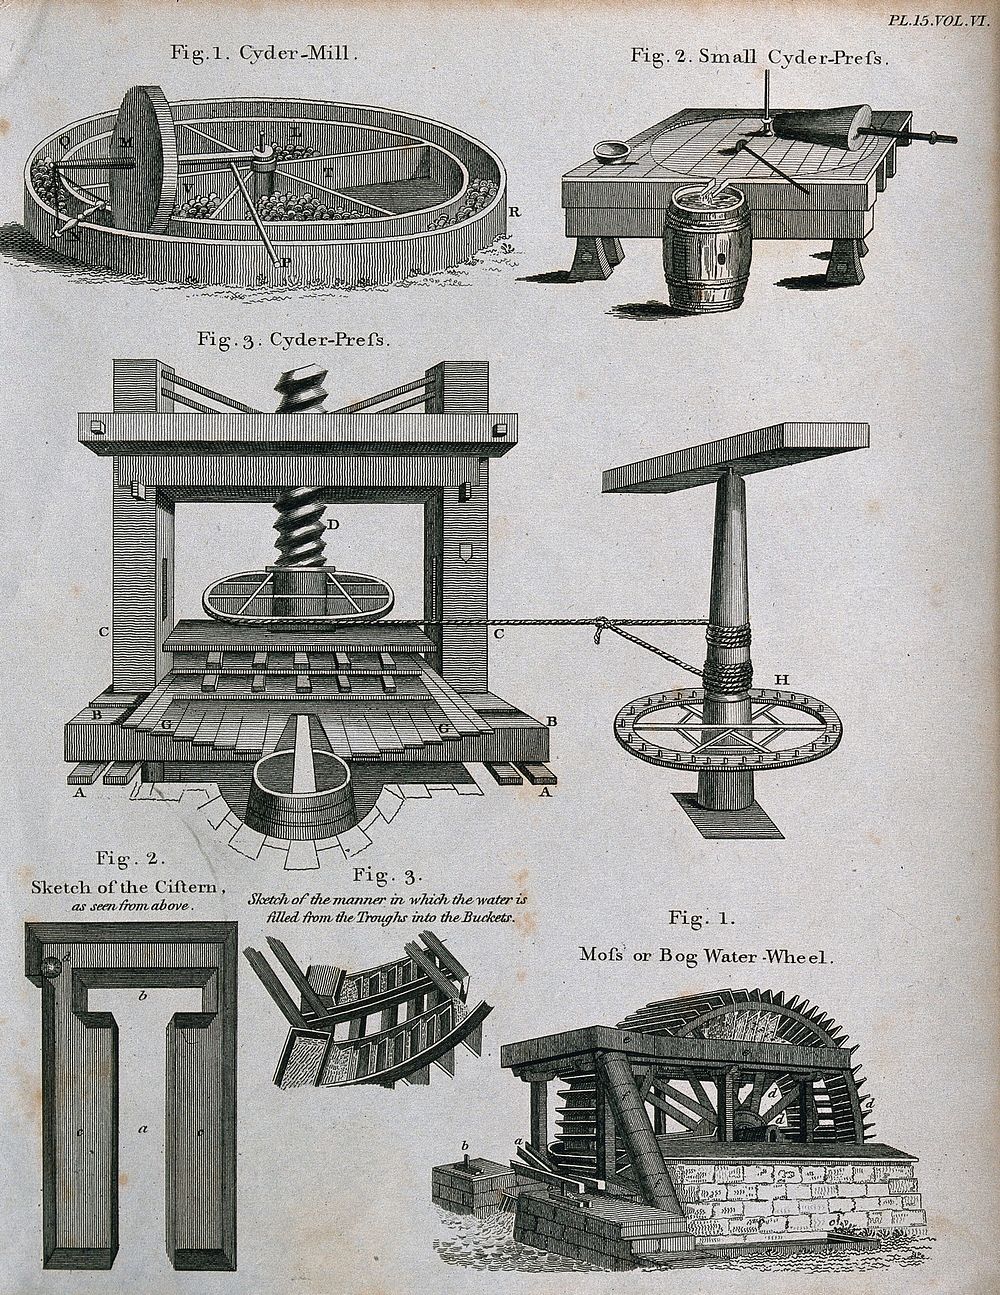 Five diagrams of a cider mill, cider press and water-wheel. Engraving, c. 1790 .